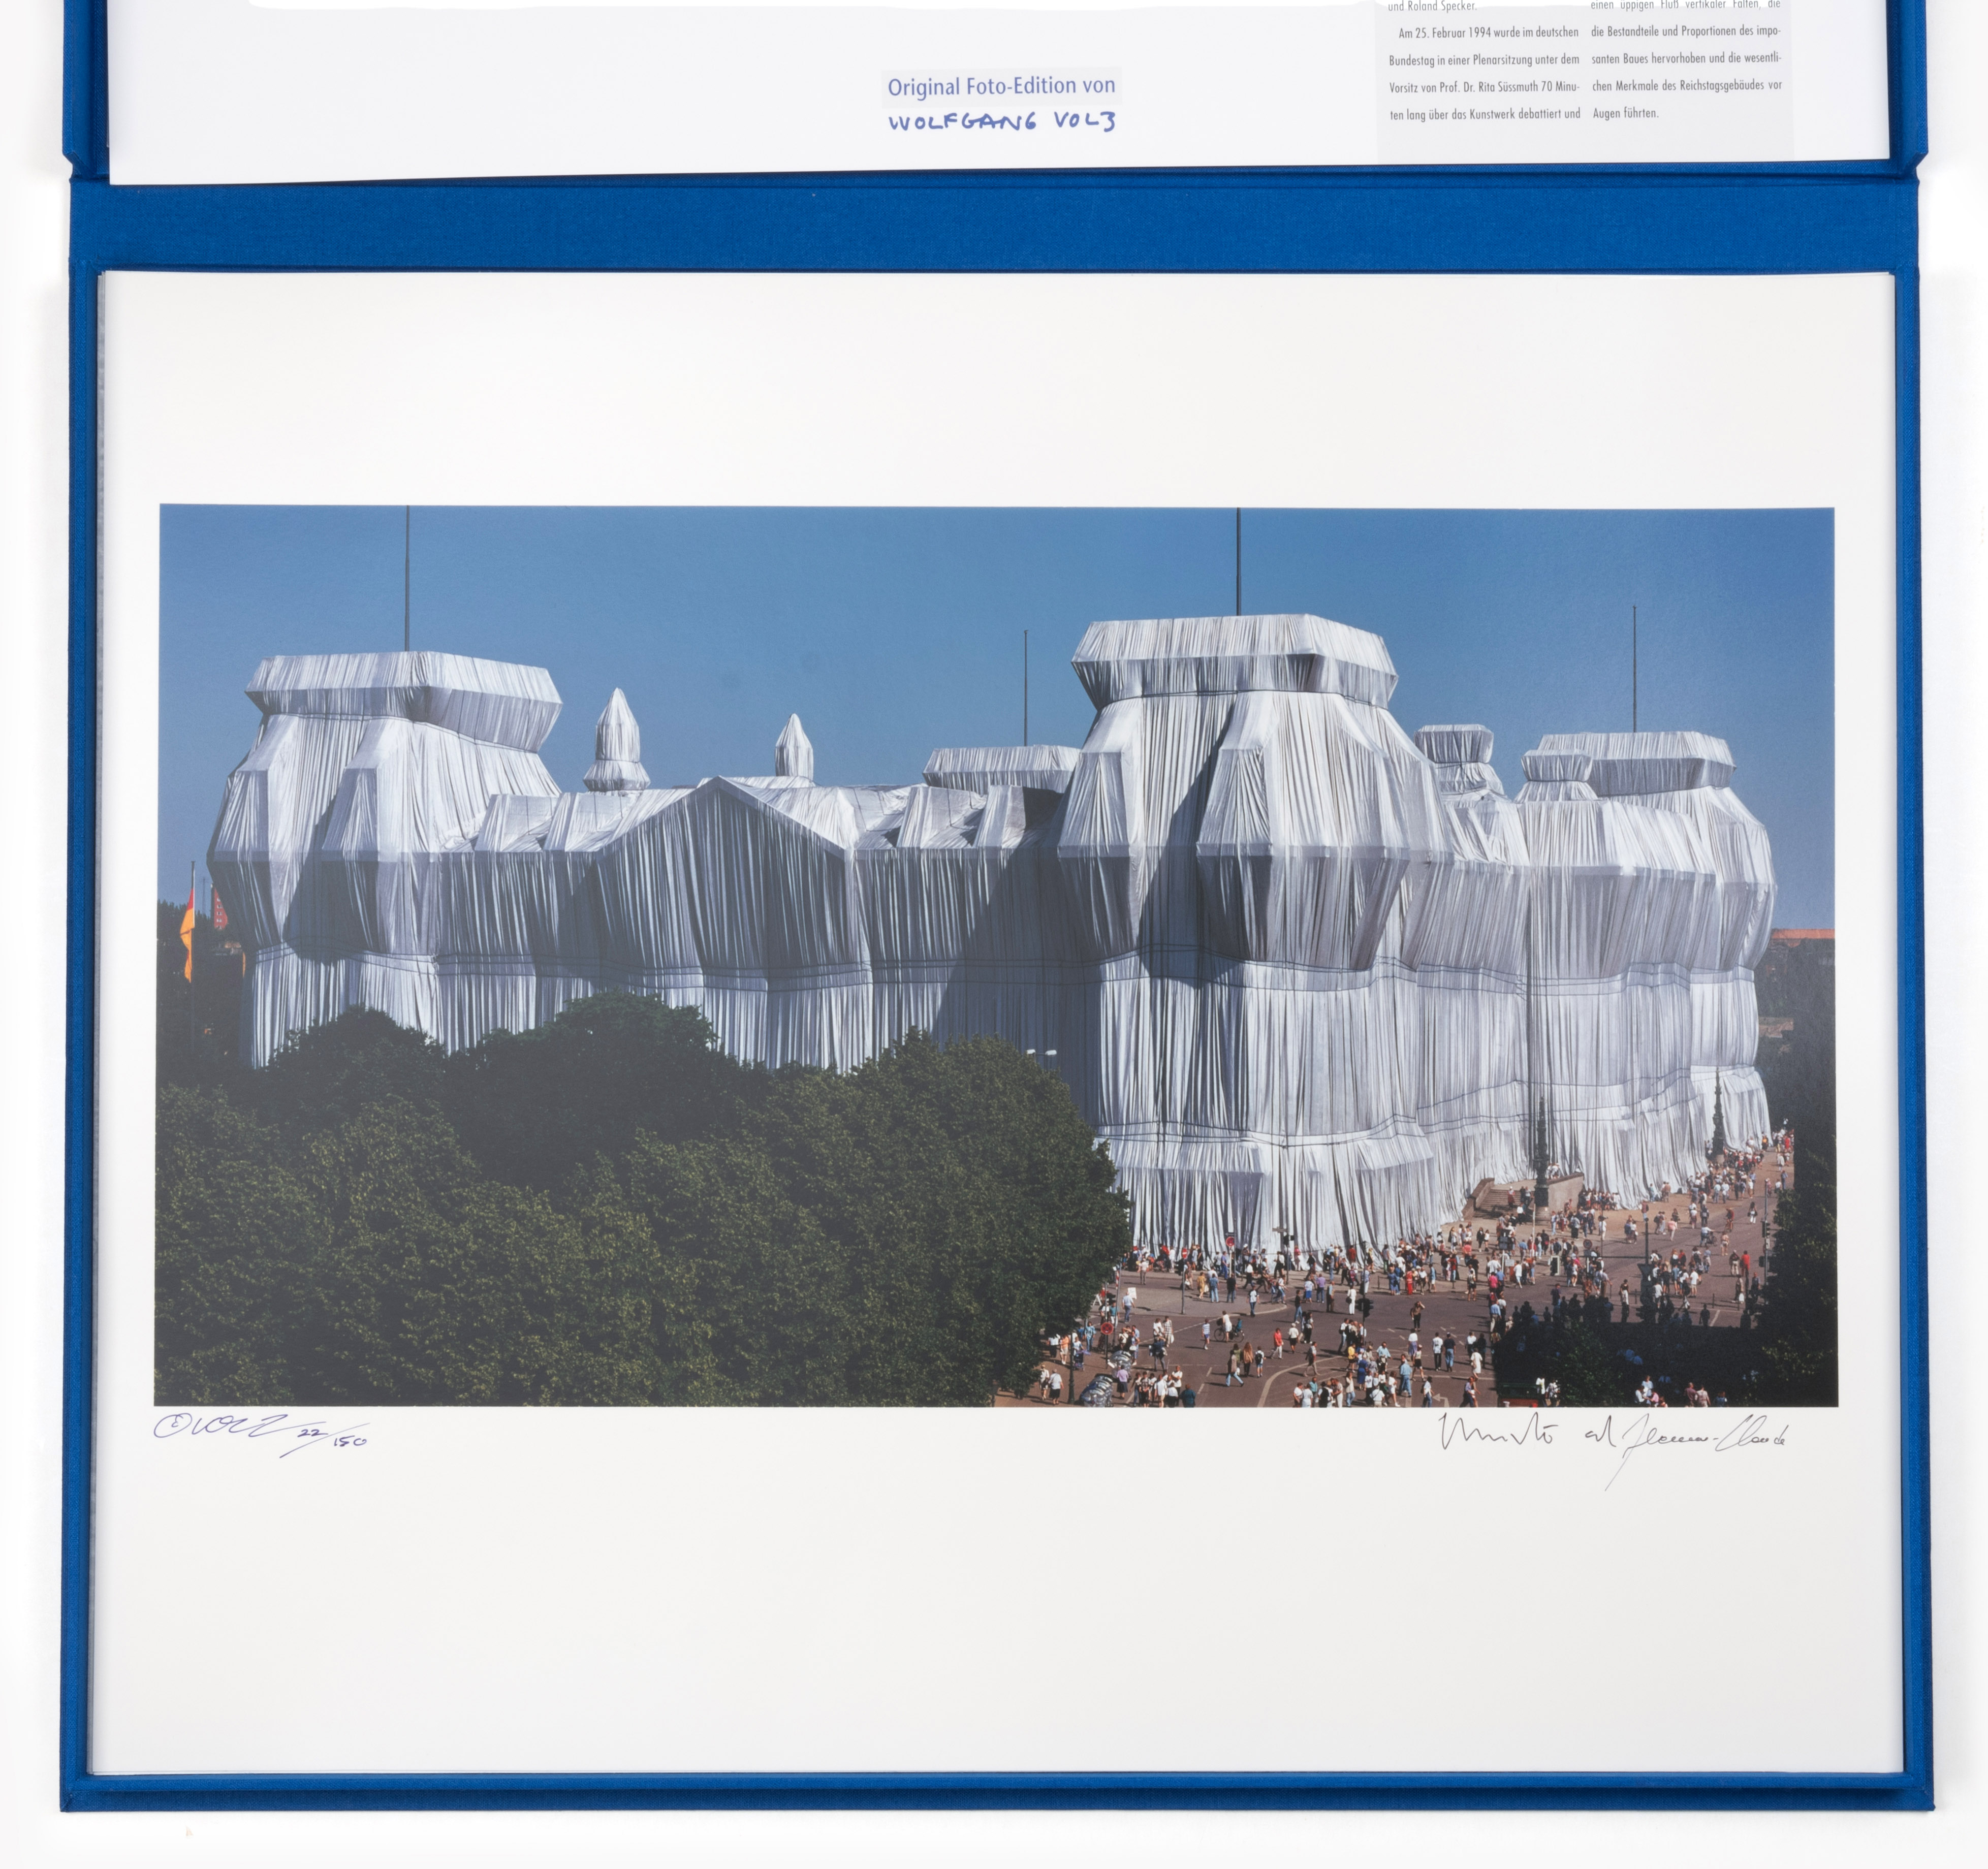 Wolfgang Volz und Christo & Jeanne-Claude (F) - Image 3 of 8